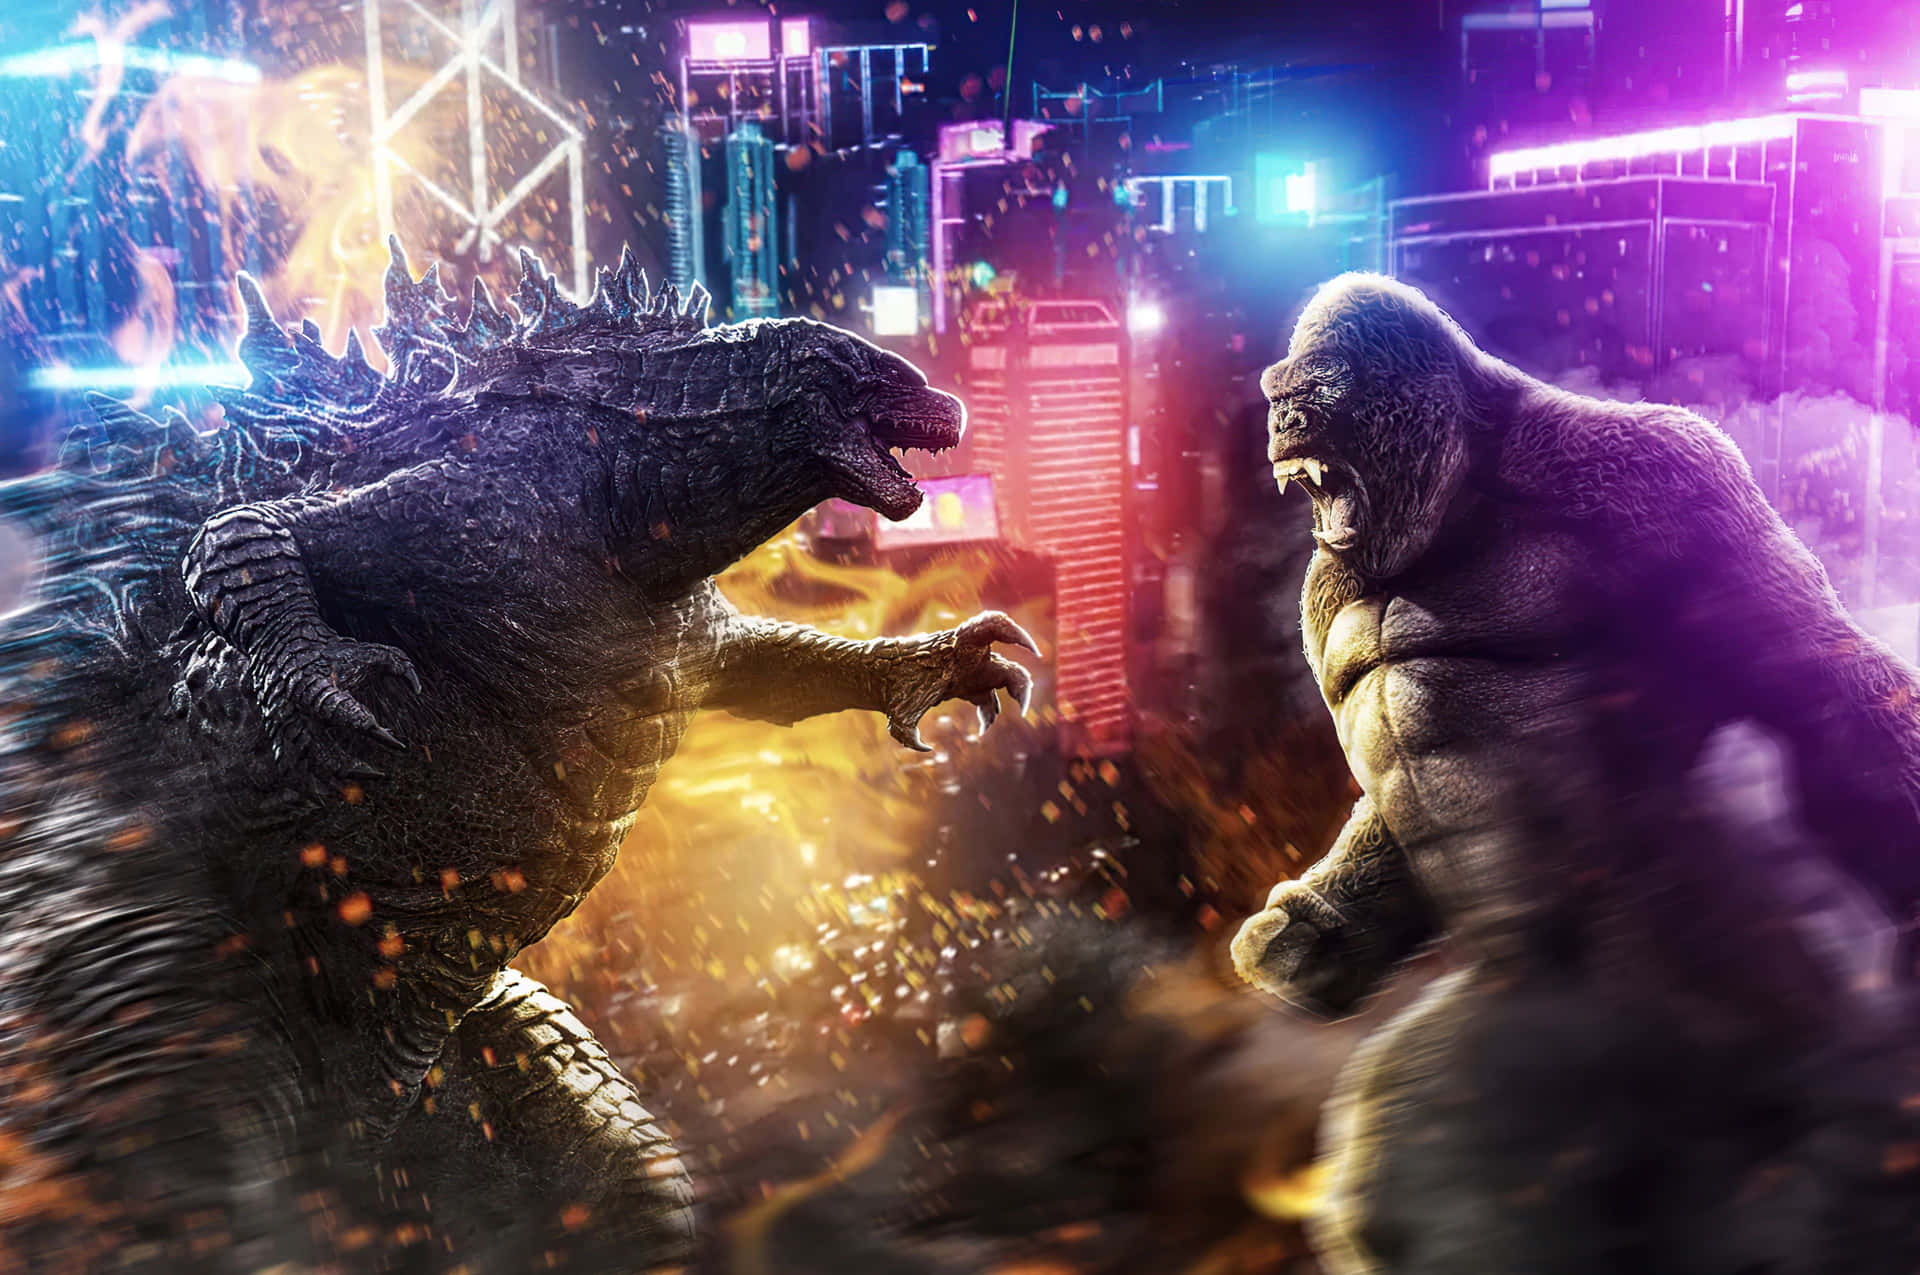 Godzilla and Kong Face-Off in an Epic Battle